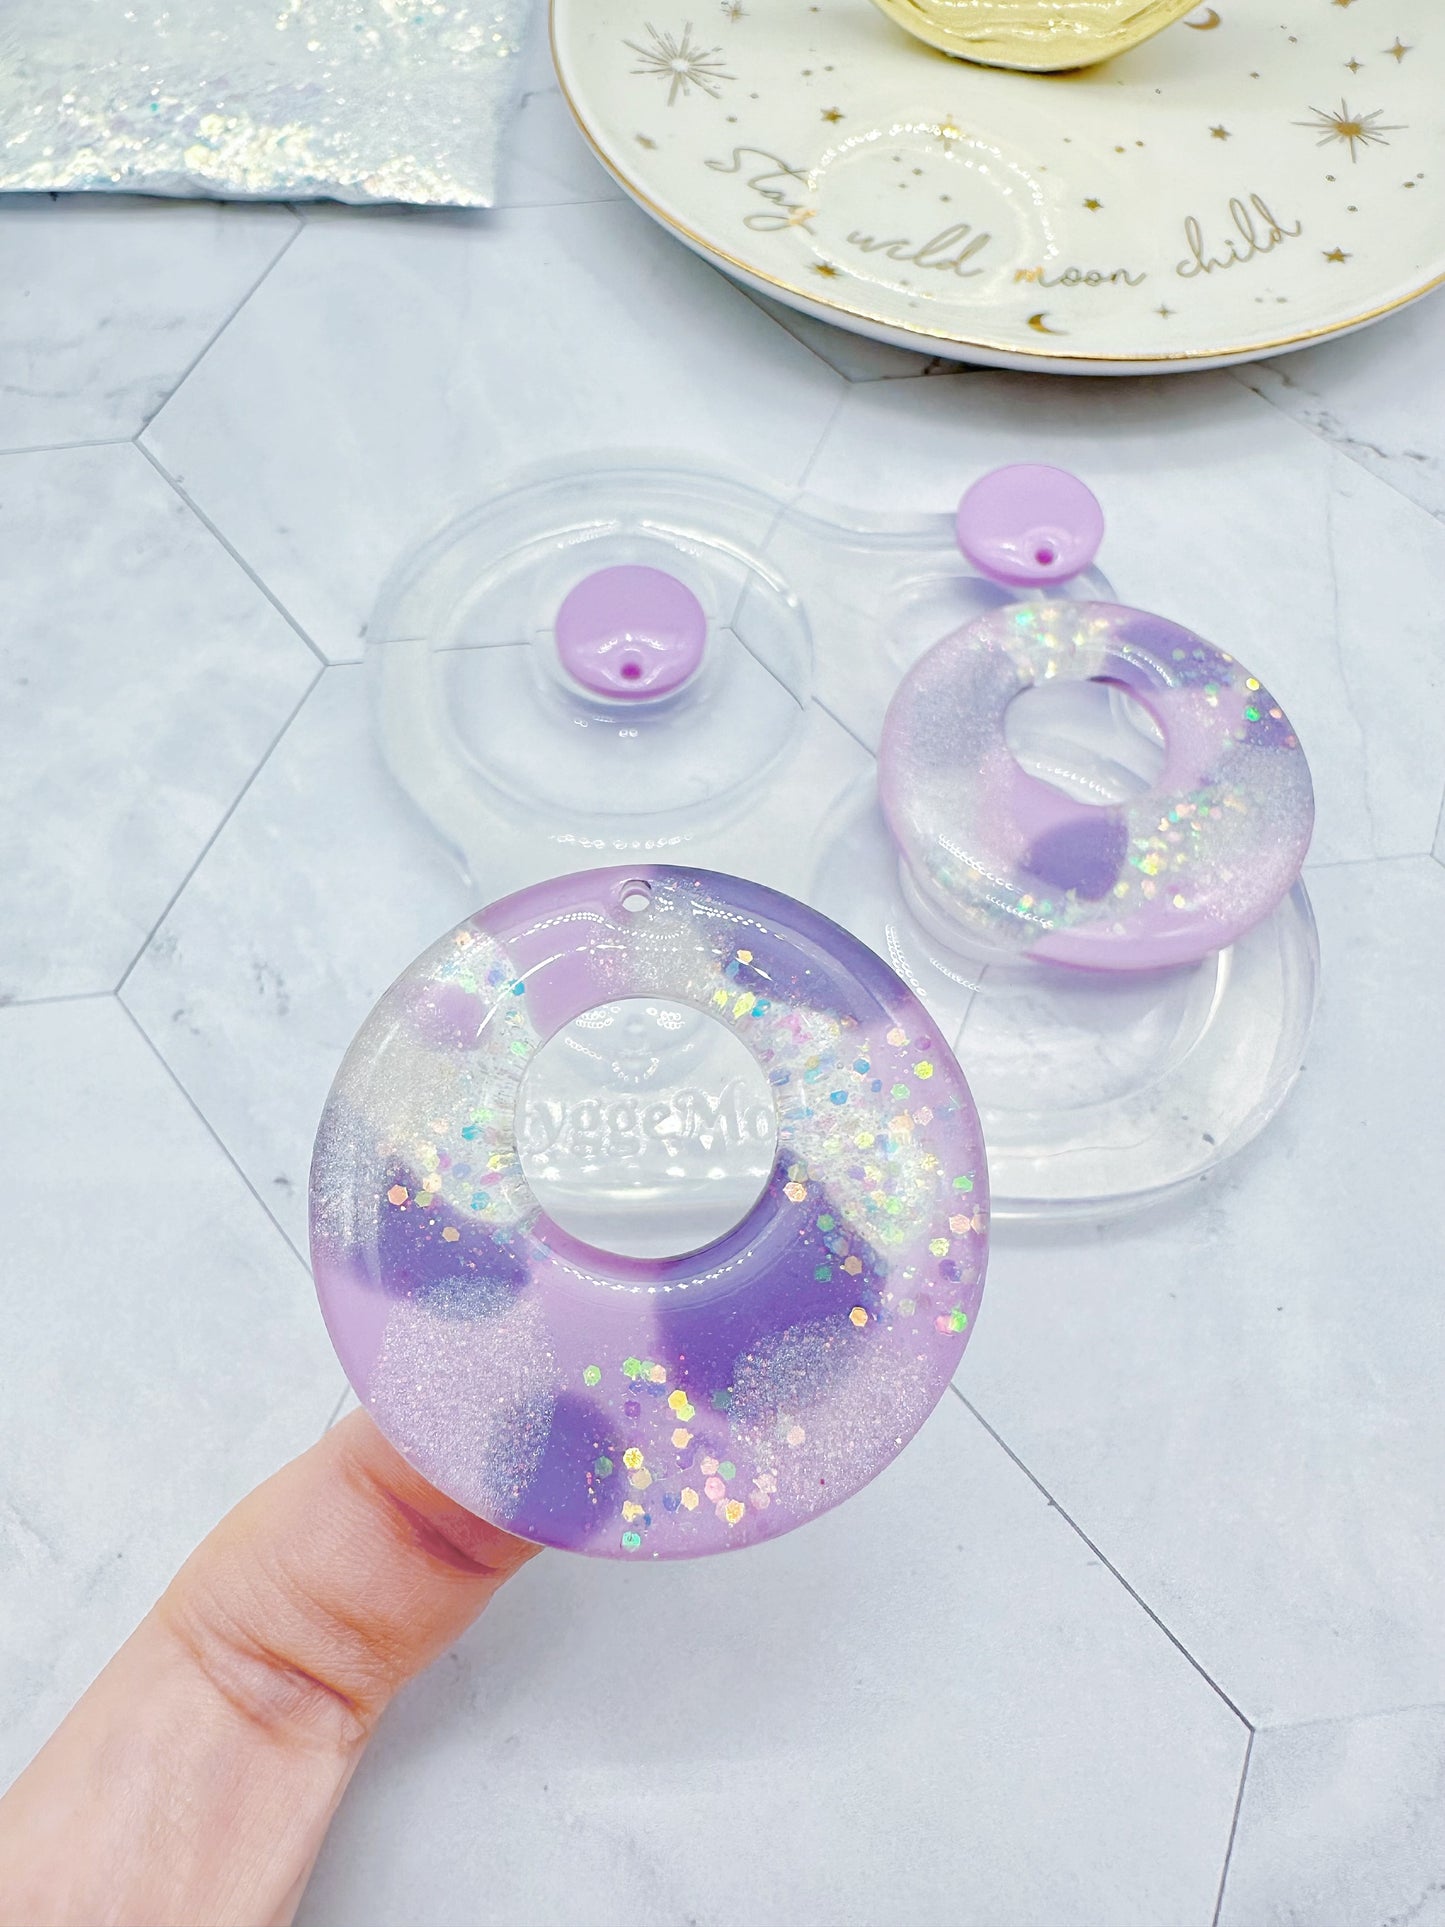 Large Pre-domed Retro Circle Dangle Earring Mold Clear Silicone Mold for Resin Jewellery